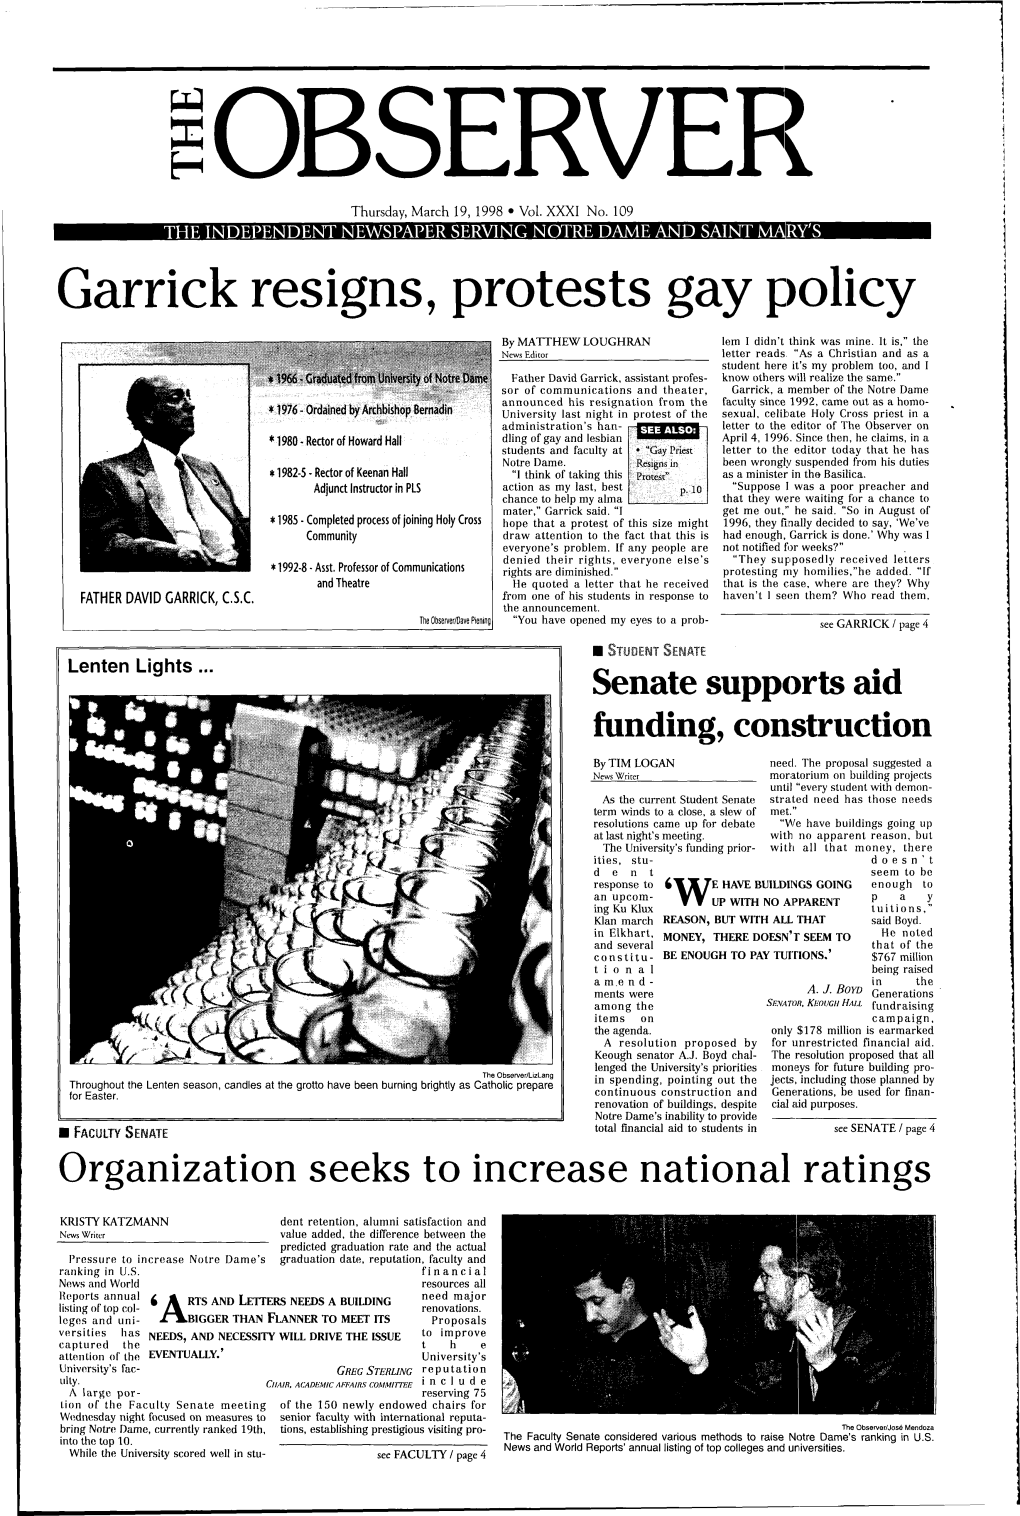 Garrick Resigns, Protests Gay Policy